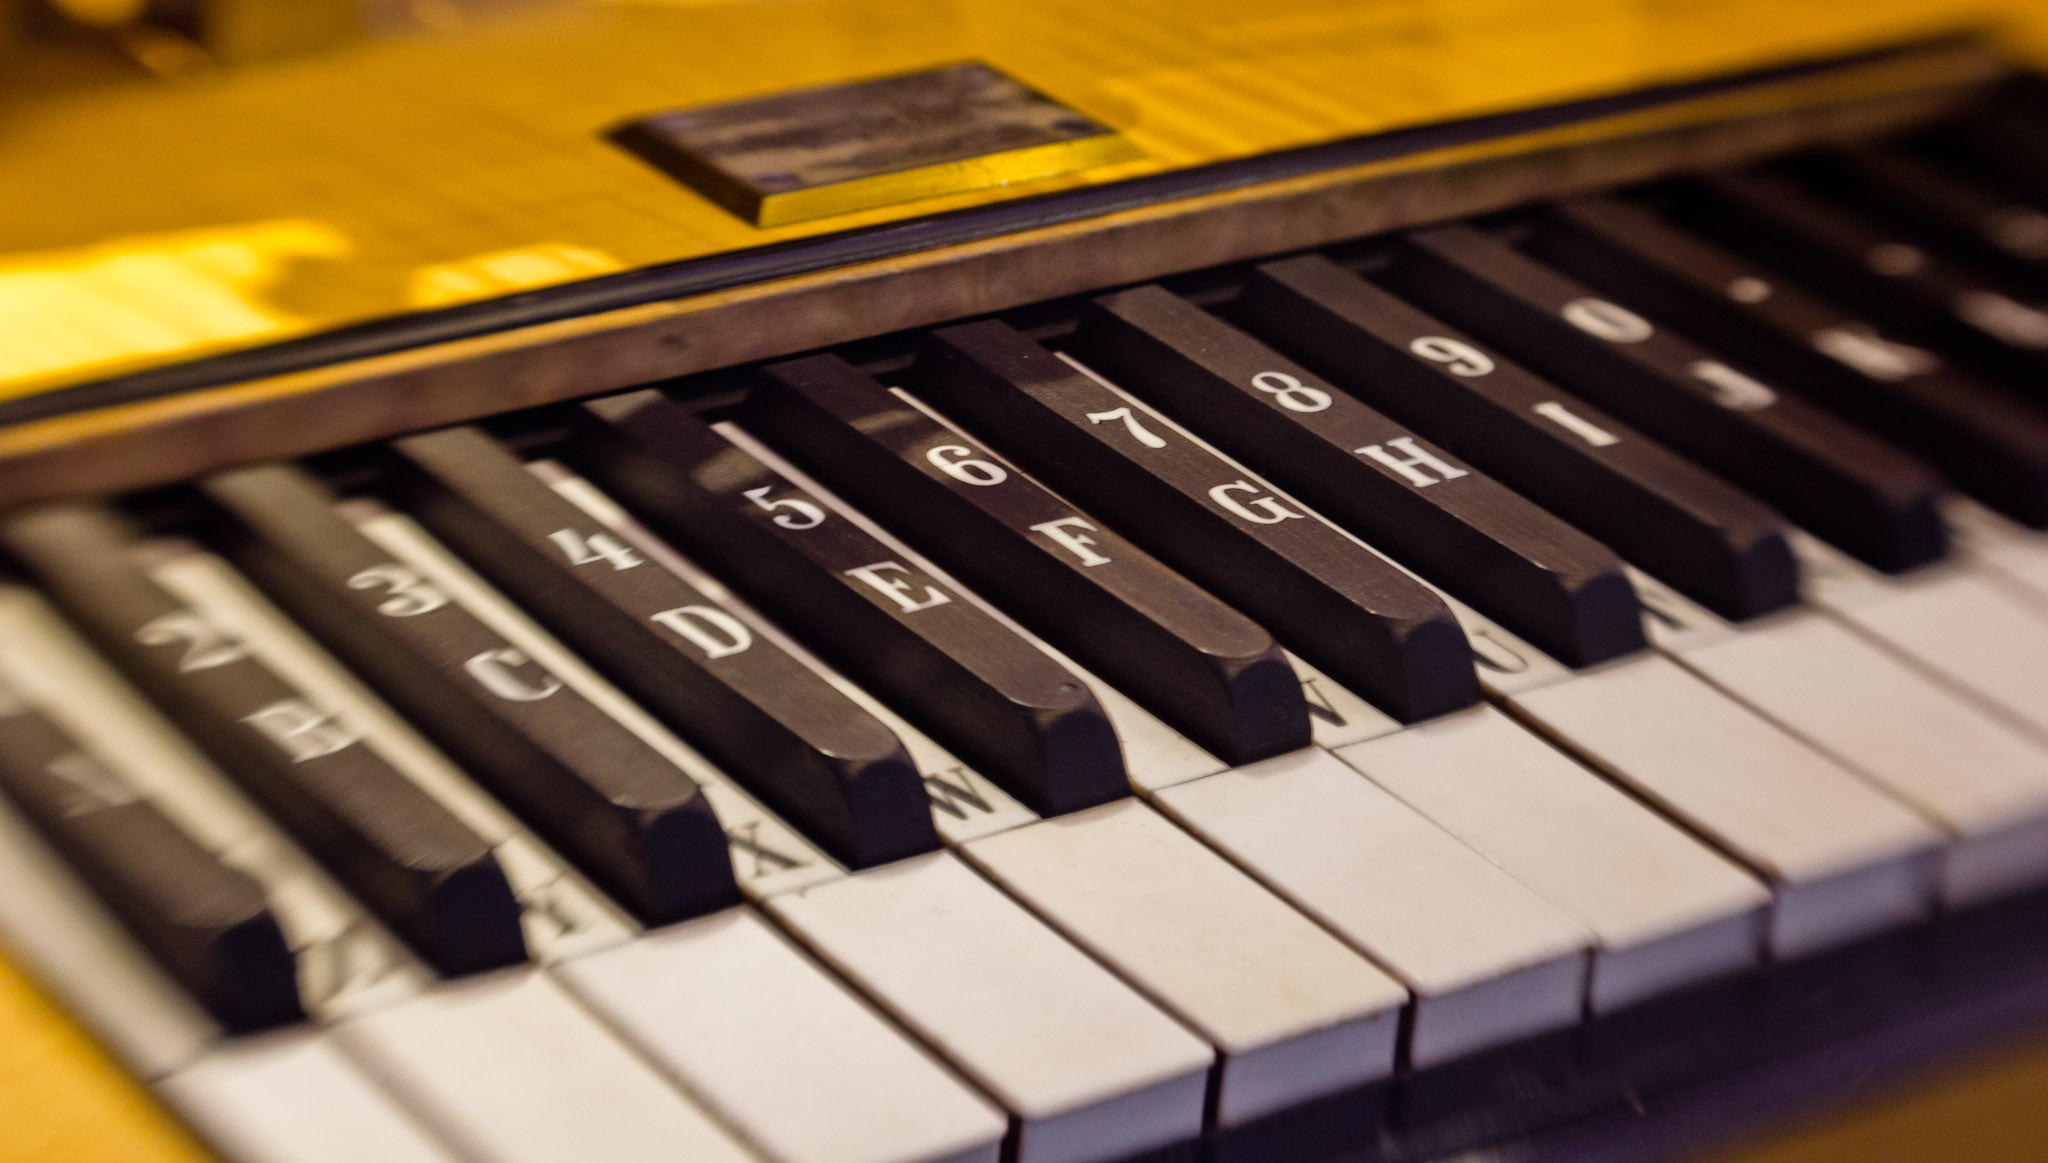 piano keys with black numbers sitting on a yellow surface